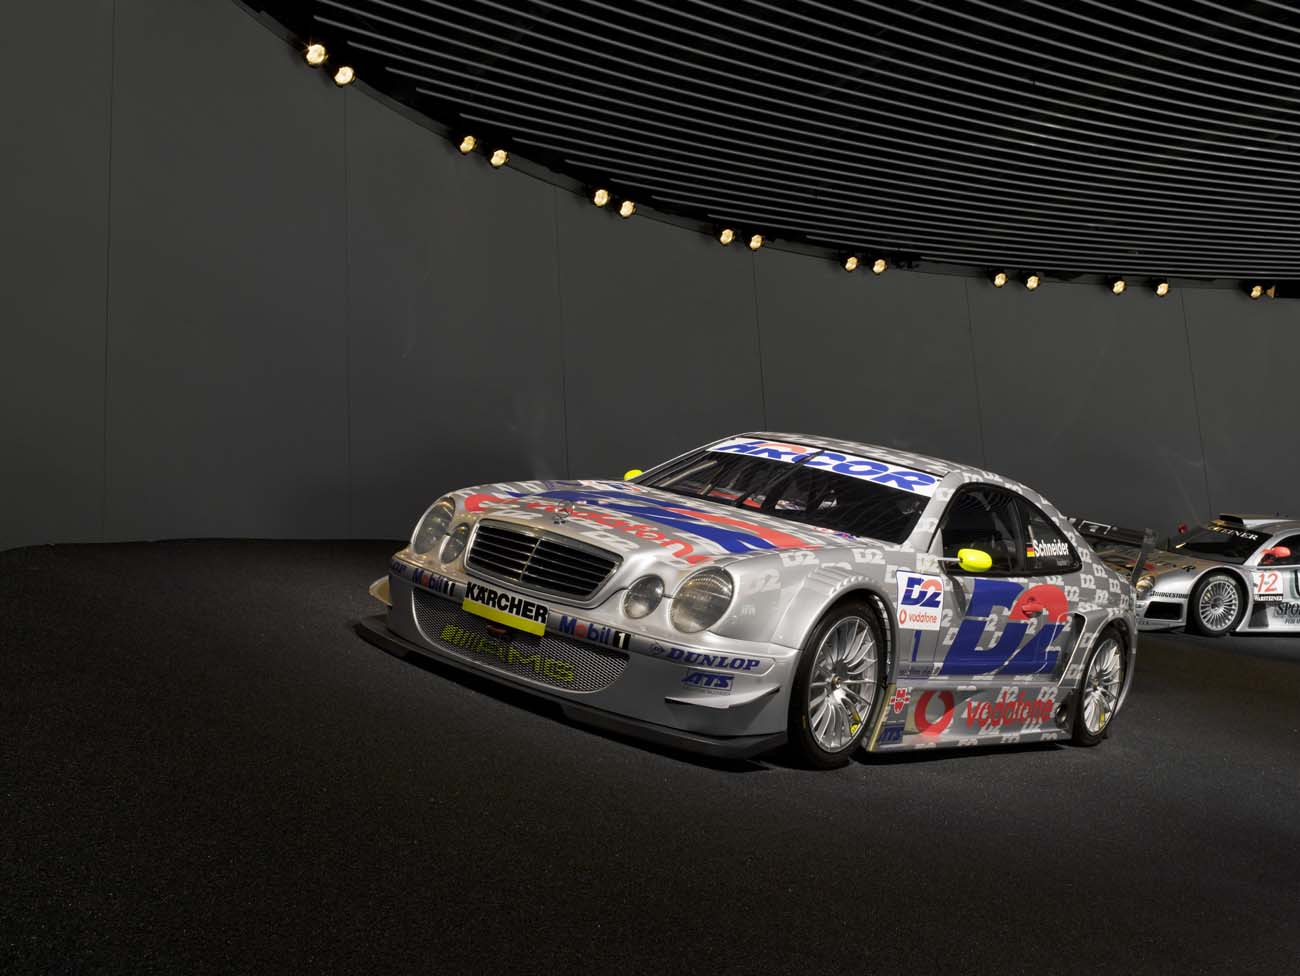 AMG-Mercedes CLK DTM driven by Bernd Schneider at the Mercedes-Benz Museum. Legend Room 7: Silver Arrows – Races and Records.